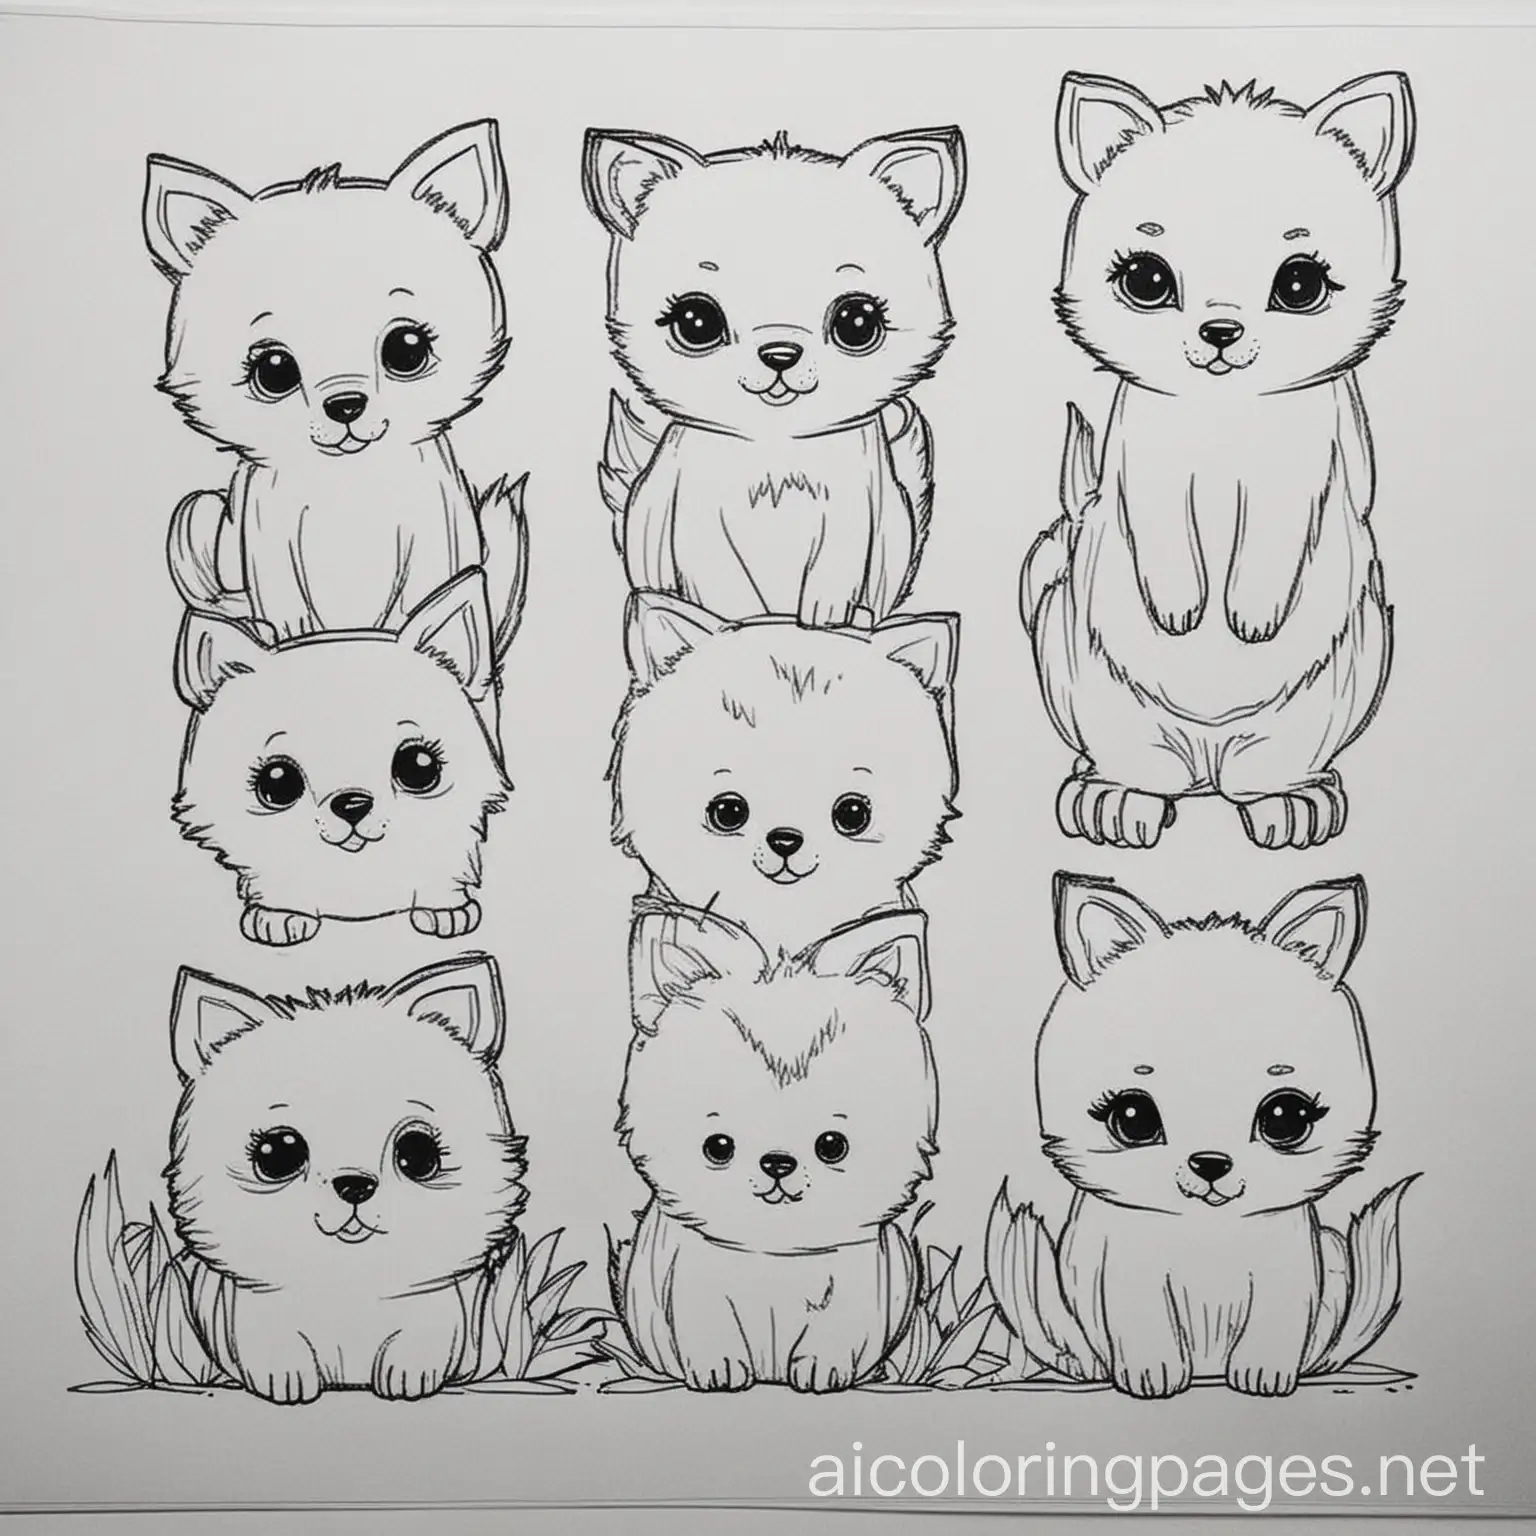 Cute animals, Coloring Page, black and white, line art, white background, Simplicity, Ample White Space. The background of the coloring page is plain white to make it easy for young children to color within the lines. The outlines of all the subjects are easy to distinguish, making it simple for kids to color without too much difficulty